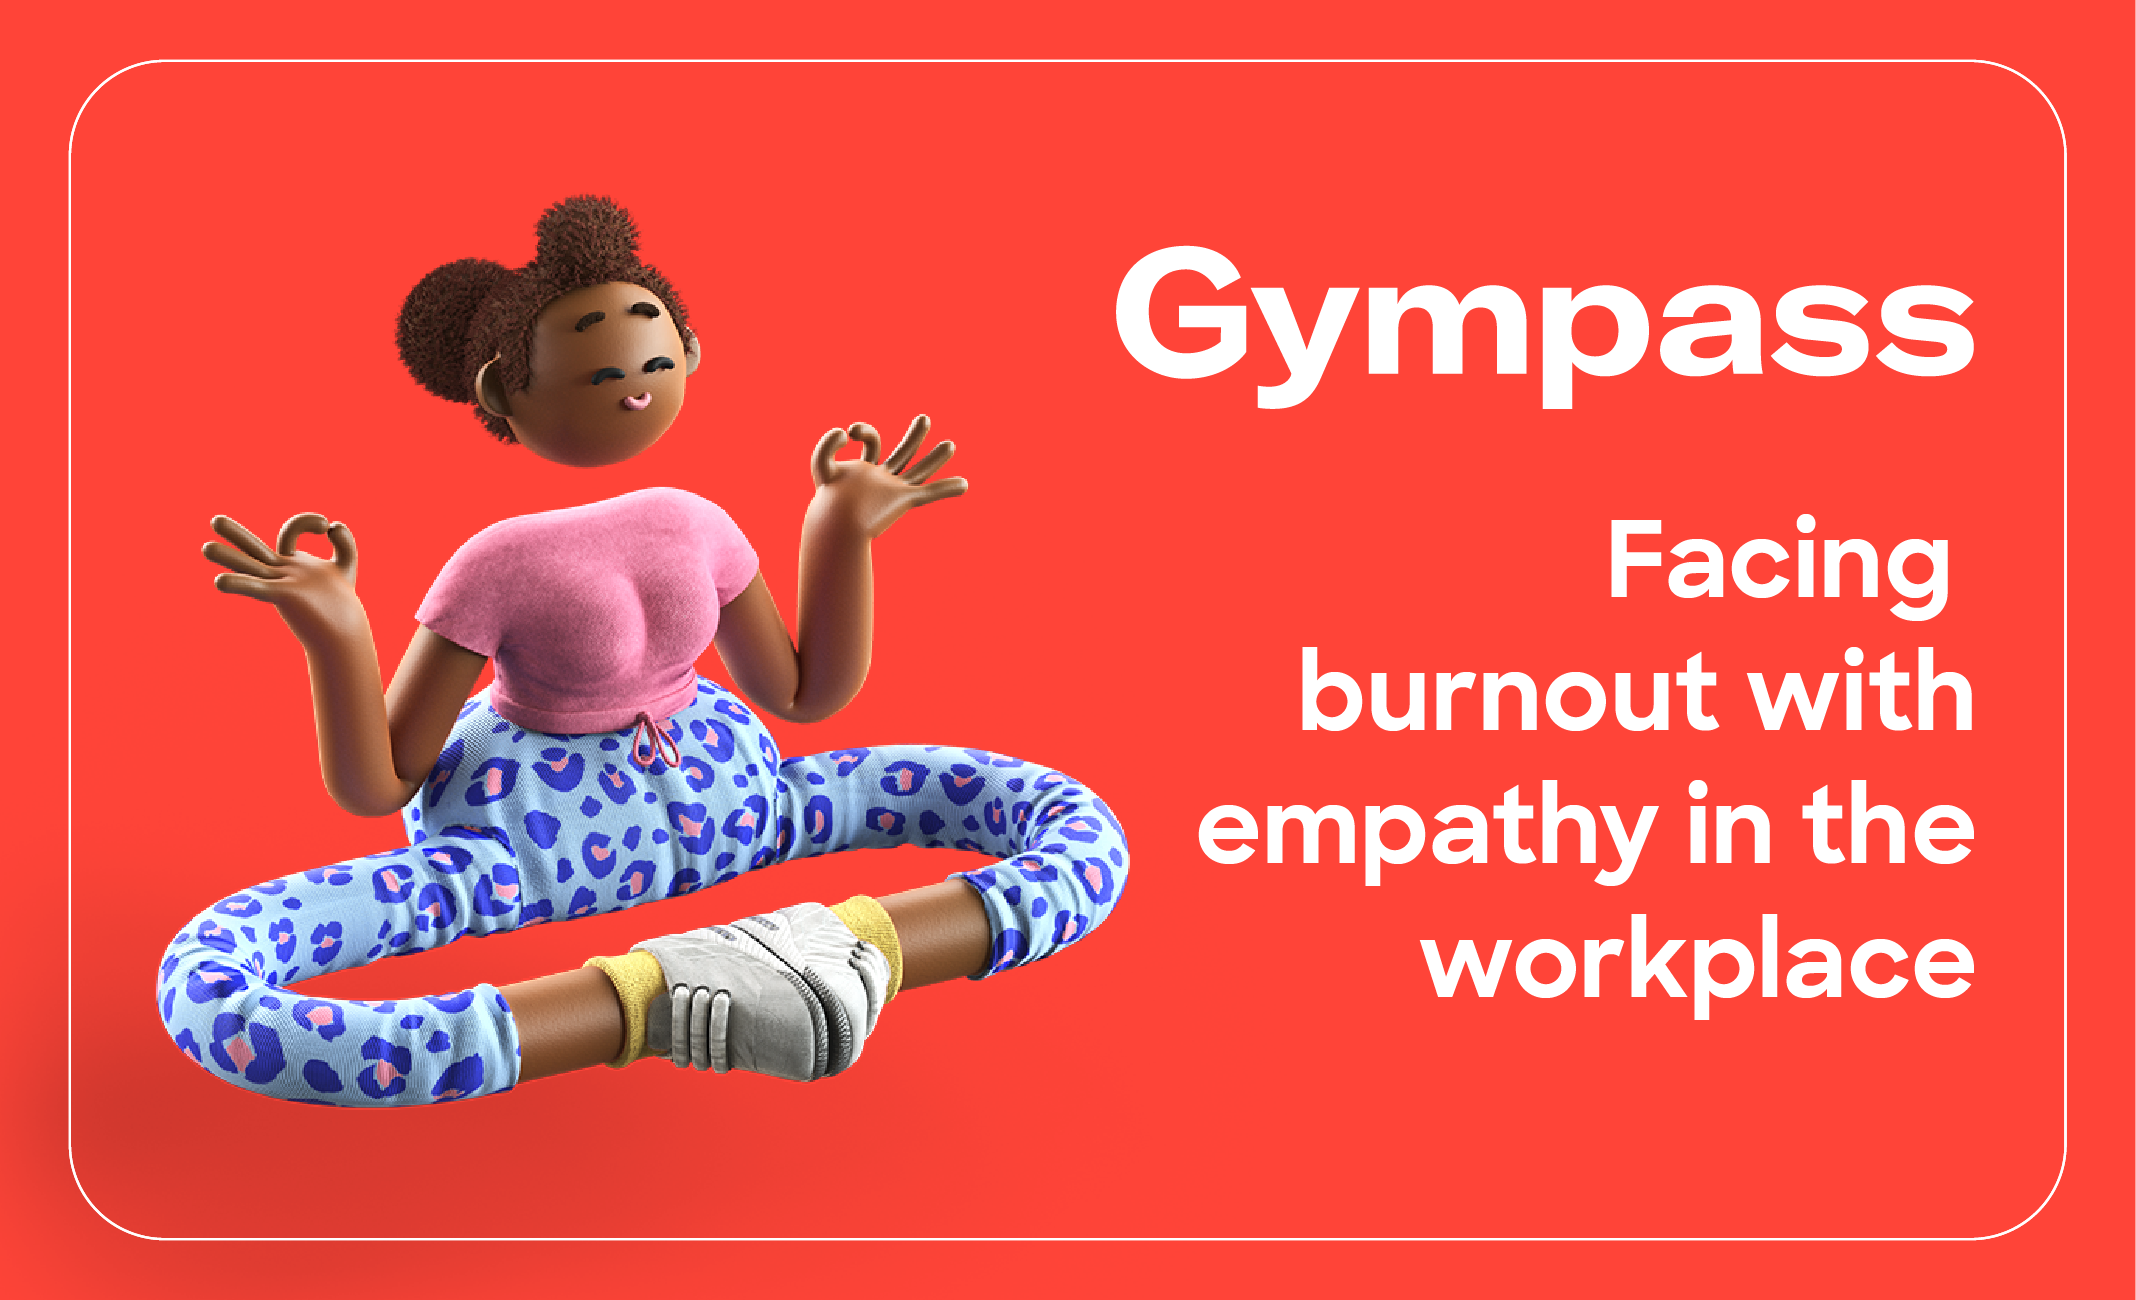 Gympass Guide: Facing burnout with empathy